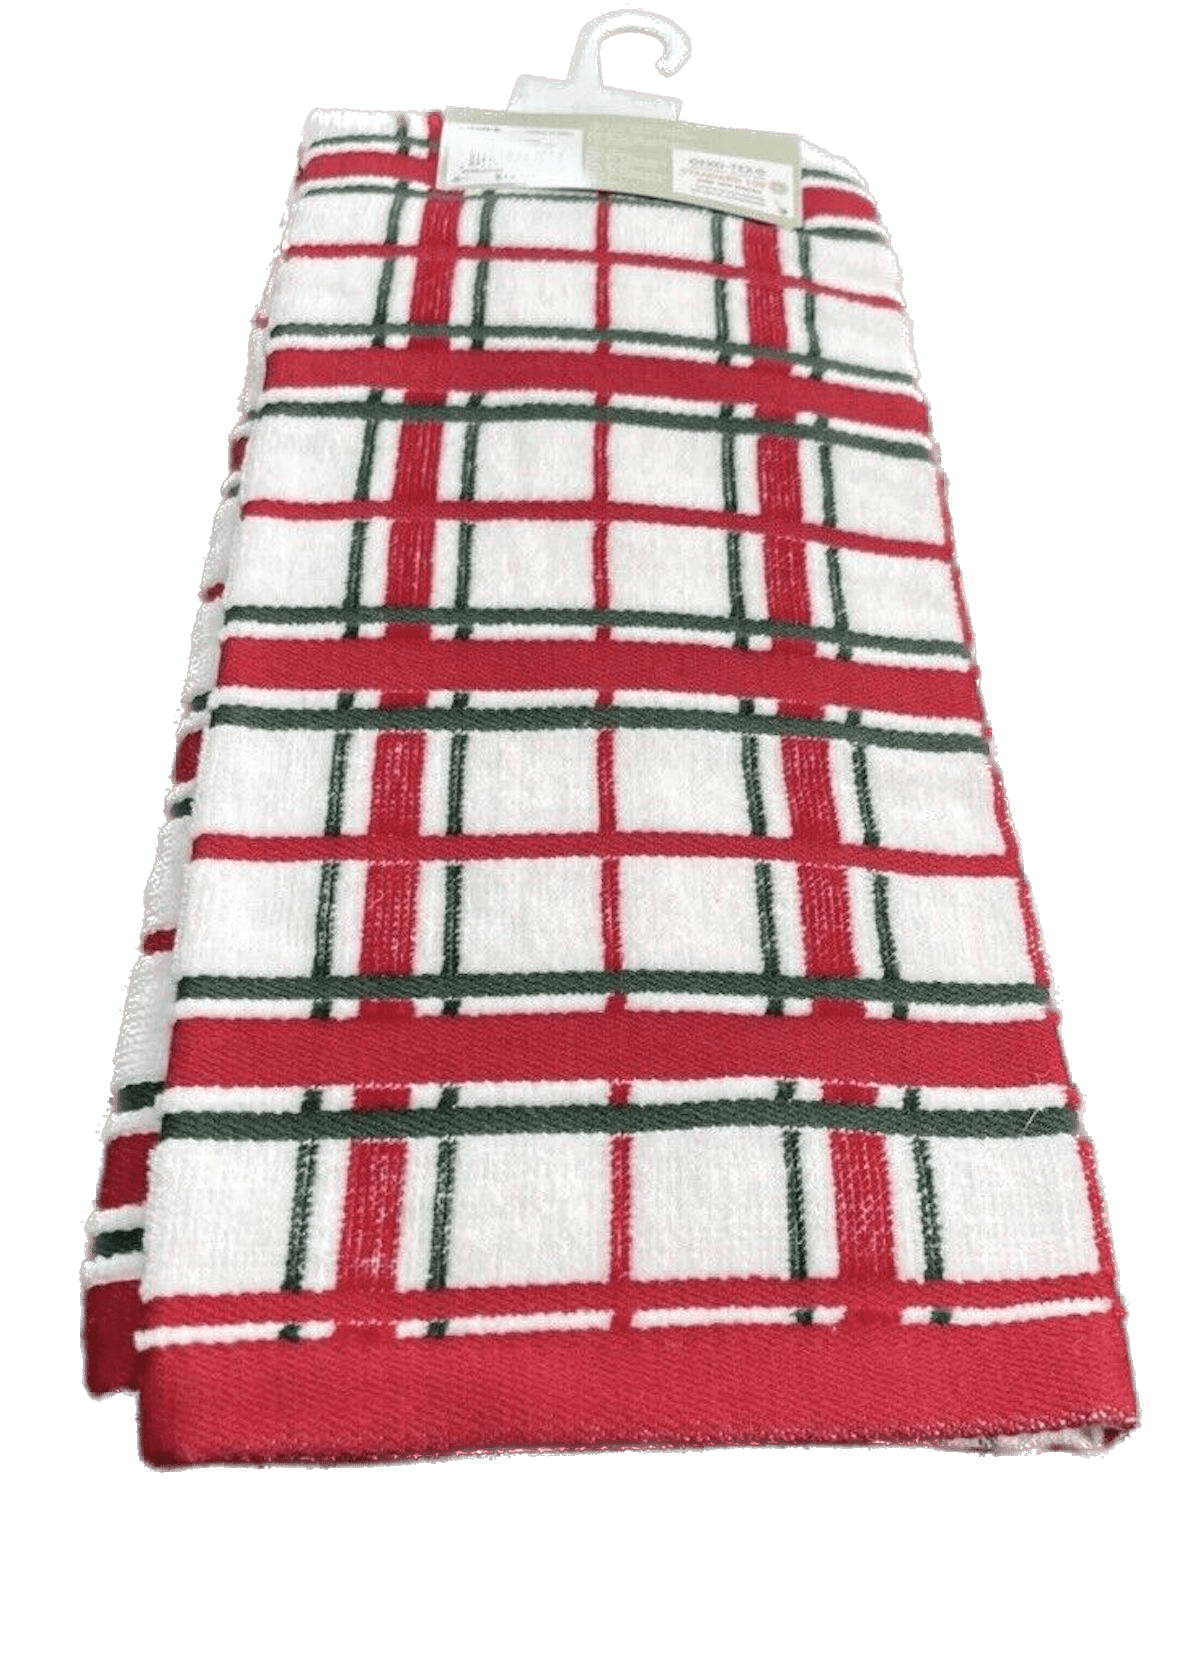 Plaid & Prints Christmas Personalized Hand Towels